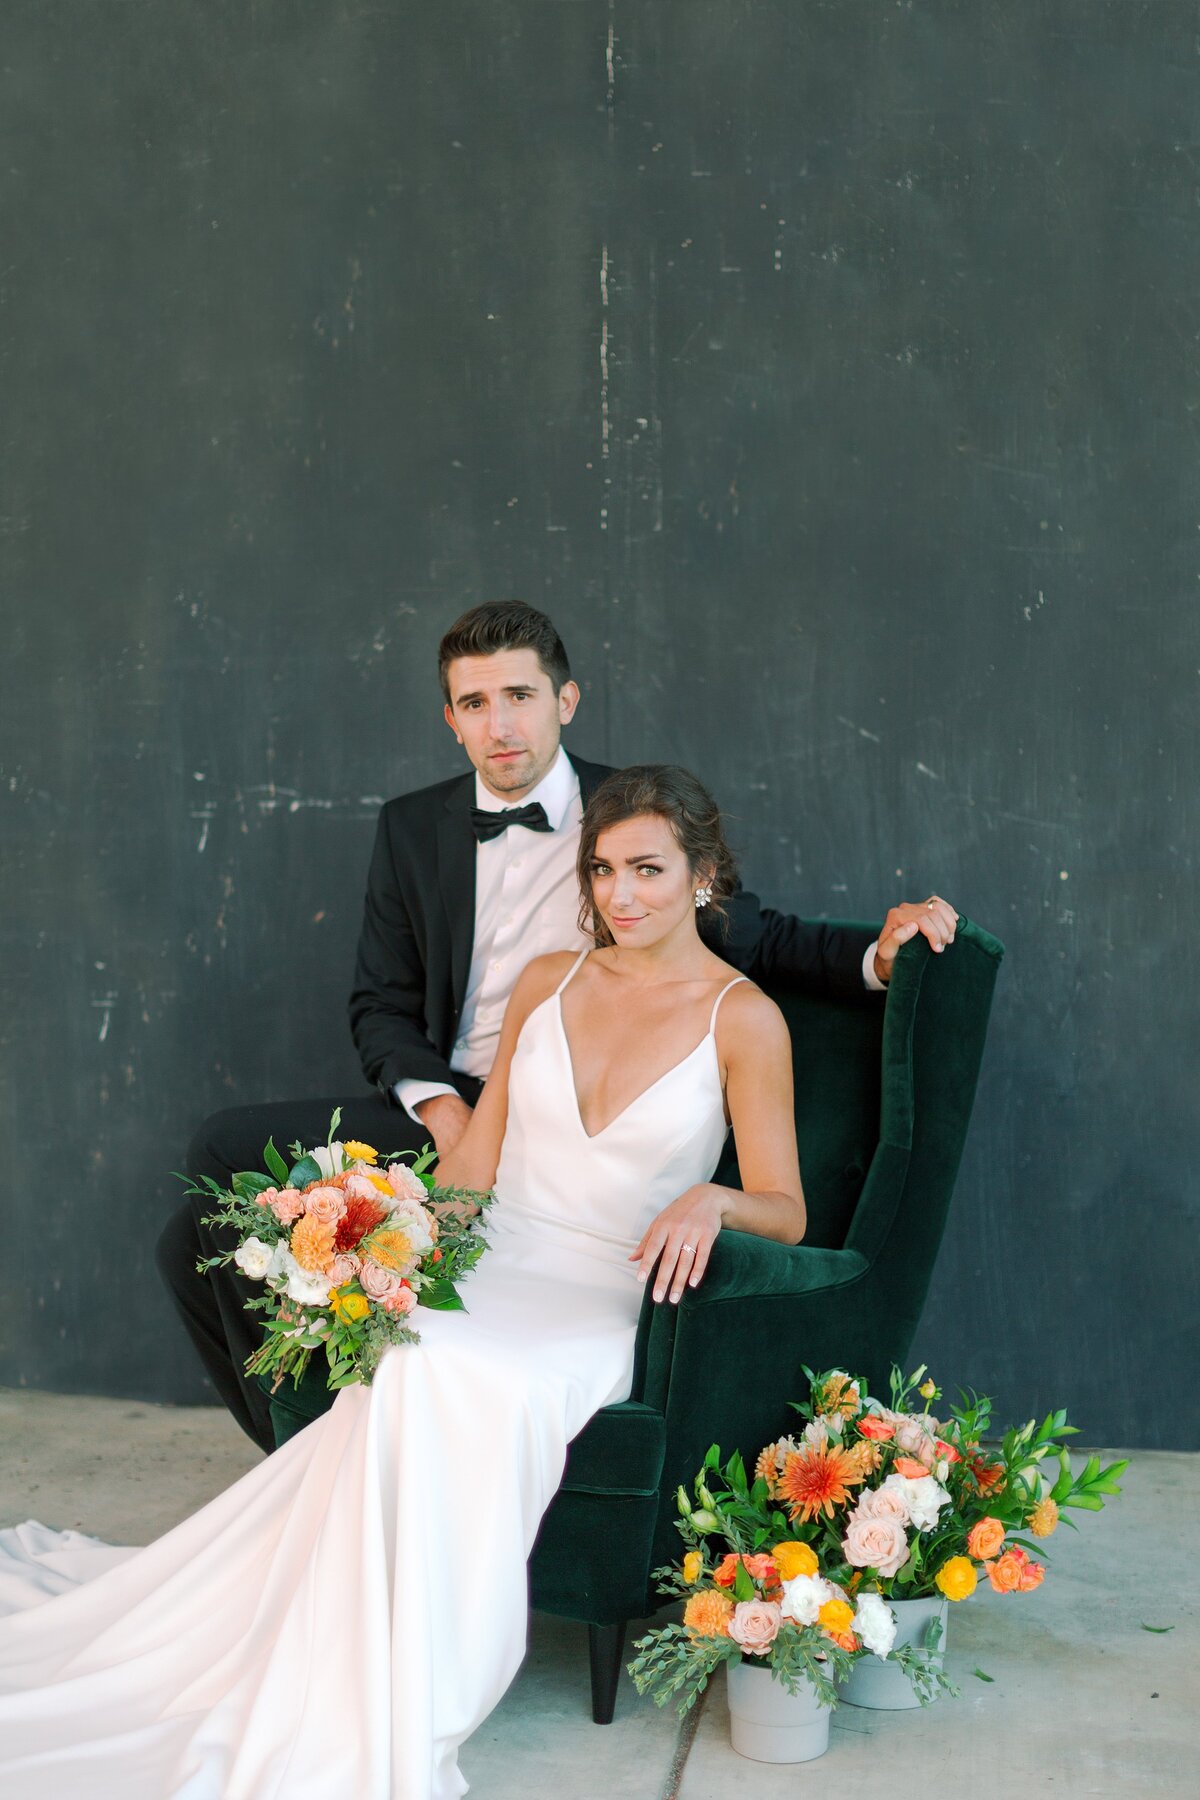 20191020 Modern Elegance Wedding Styled Shoot at Three Steves Winery Livermore_Bethany Picone Photography - 0387-Edit_WEB